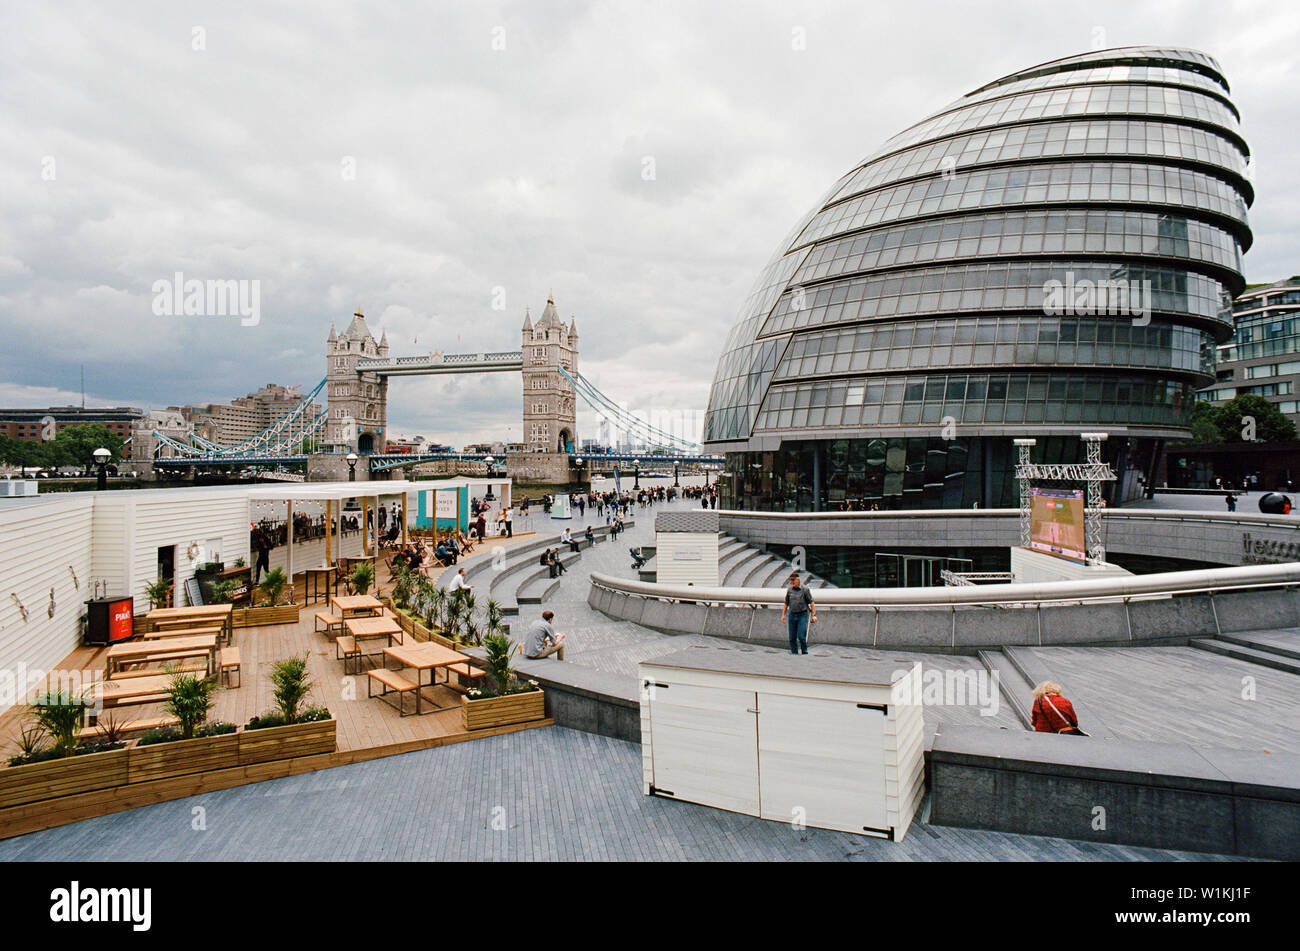 City Hall and Tower Bridge, London UK, on the South Bank of the River Thames, with The Scoop outdoor amphitheatre in foreground Stock Photo